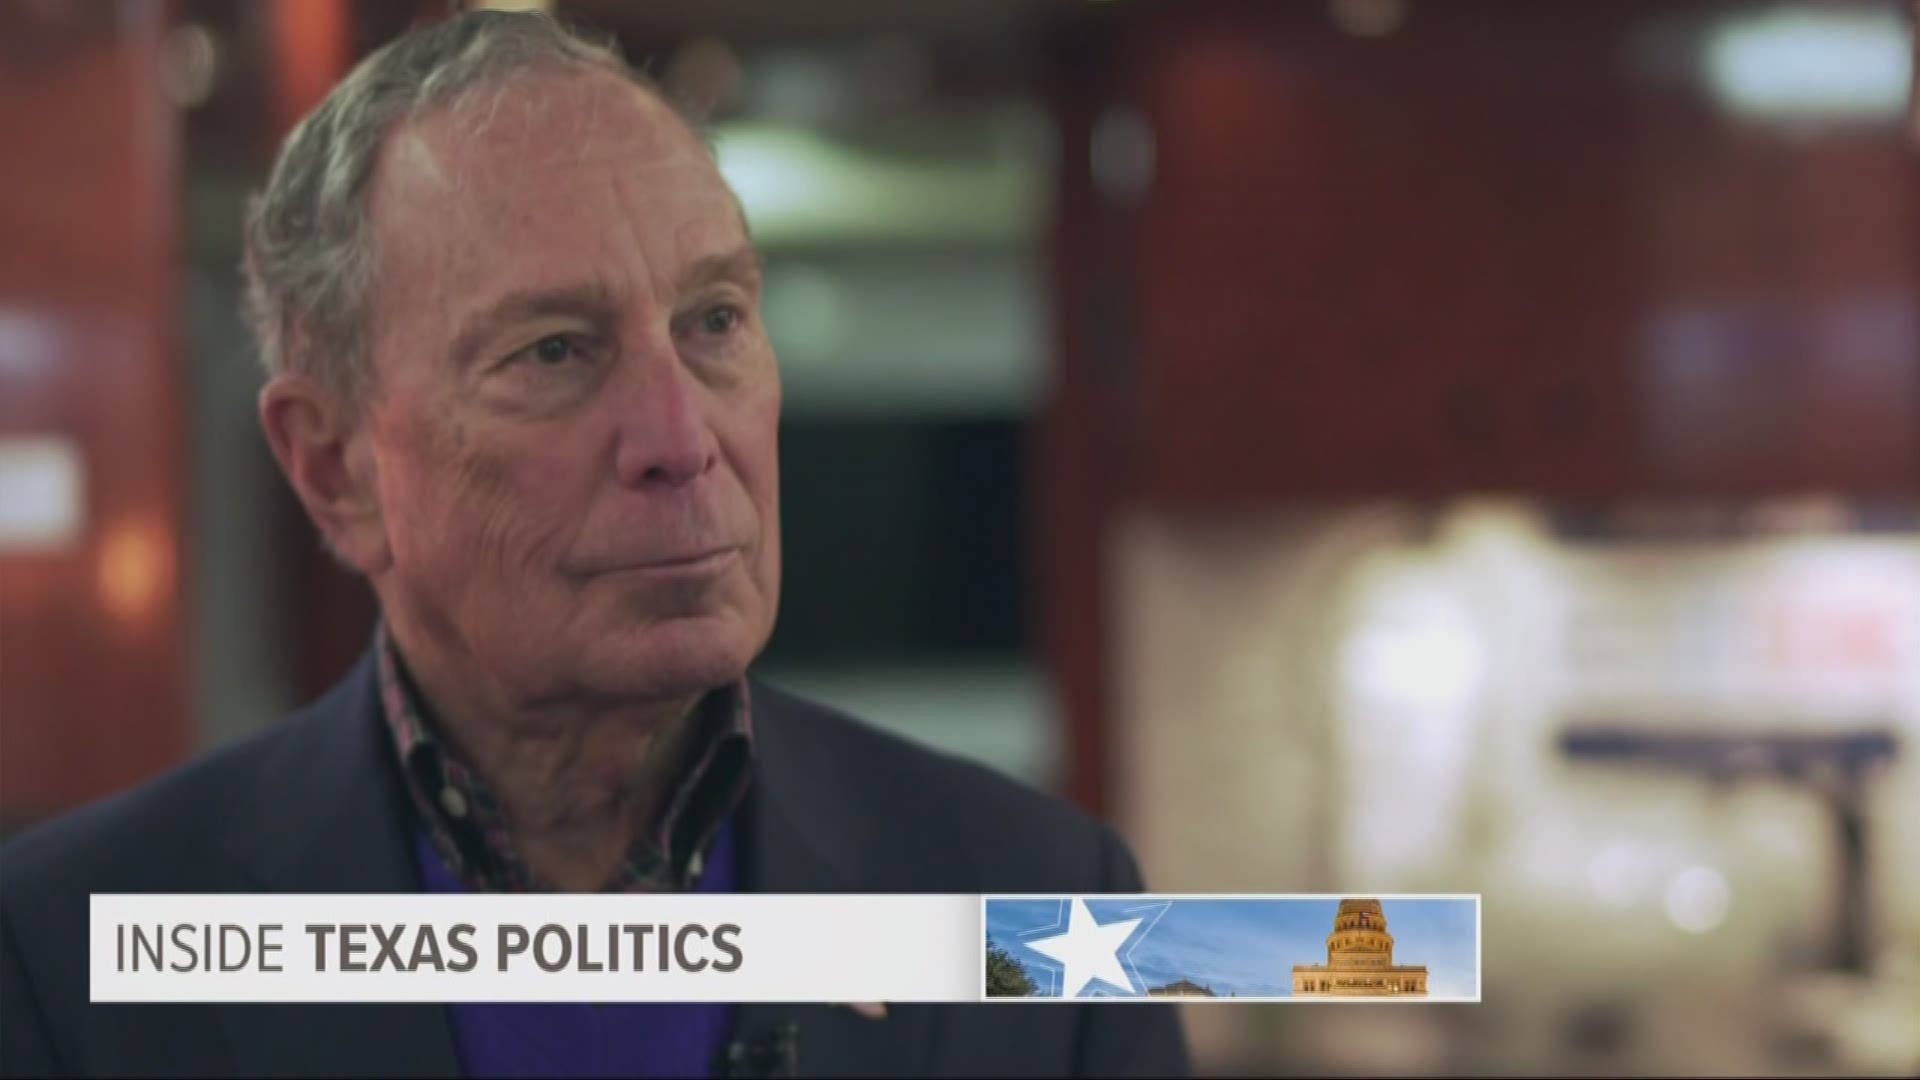 Mike Bloomberg brought his presidential campaign to Dallas last week and spoke with host Jason Whitely about why he’s concentrating on states like Texas.